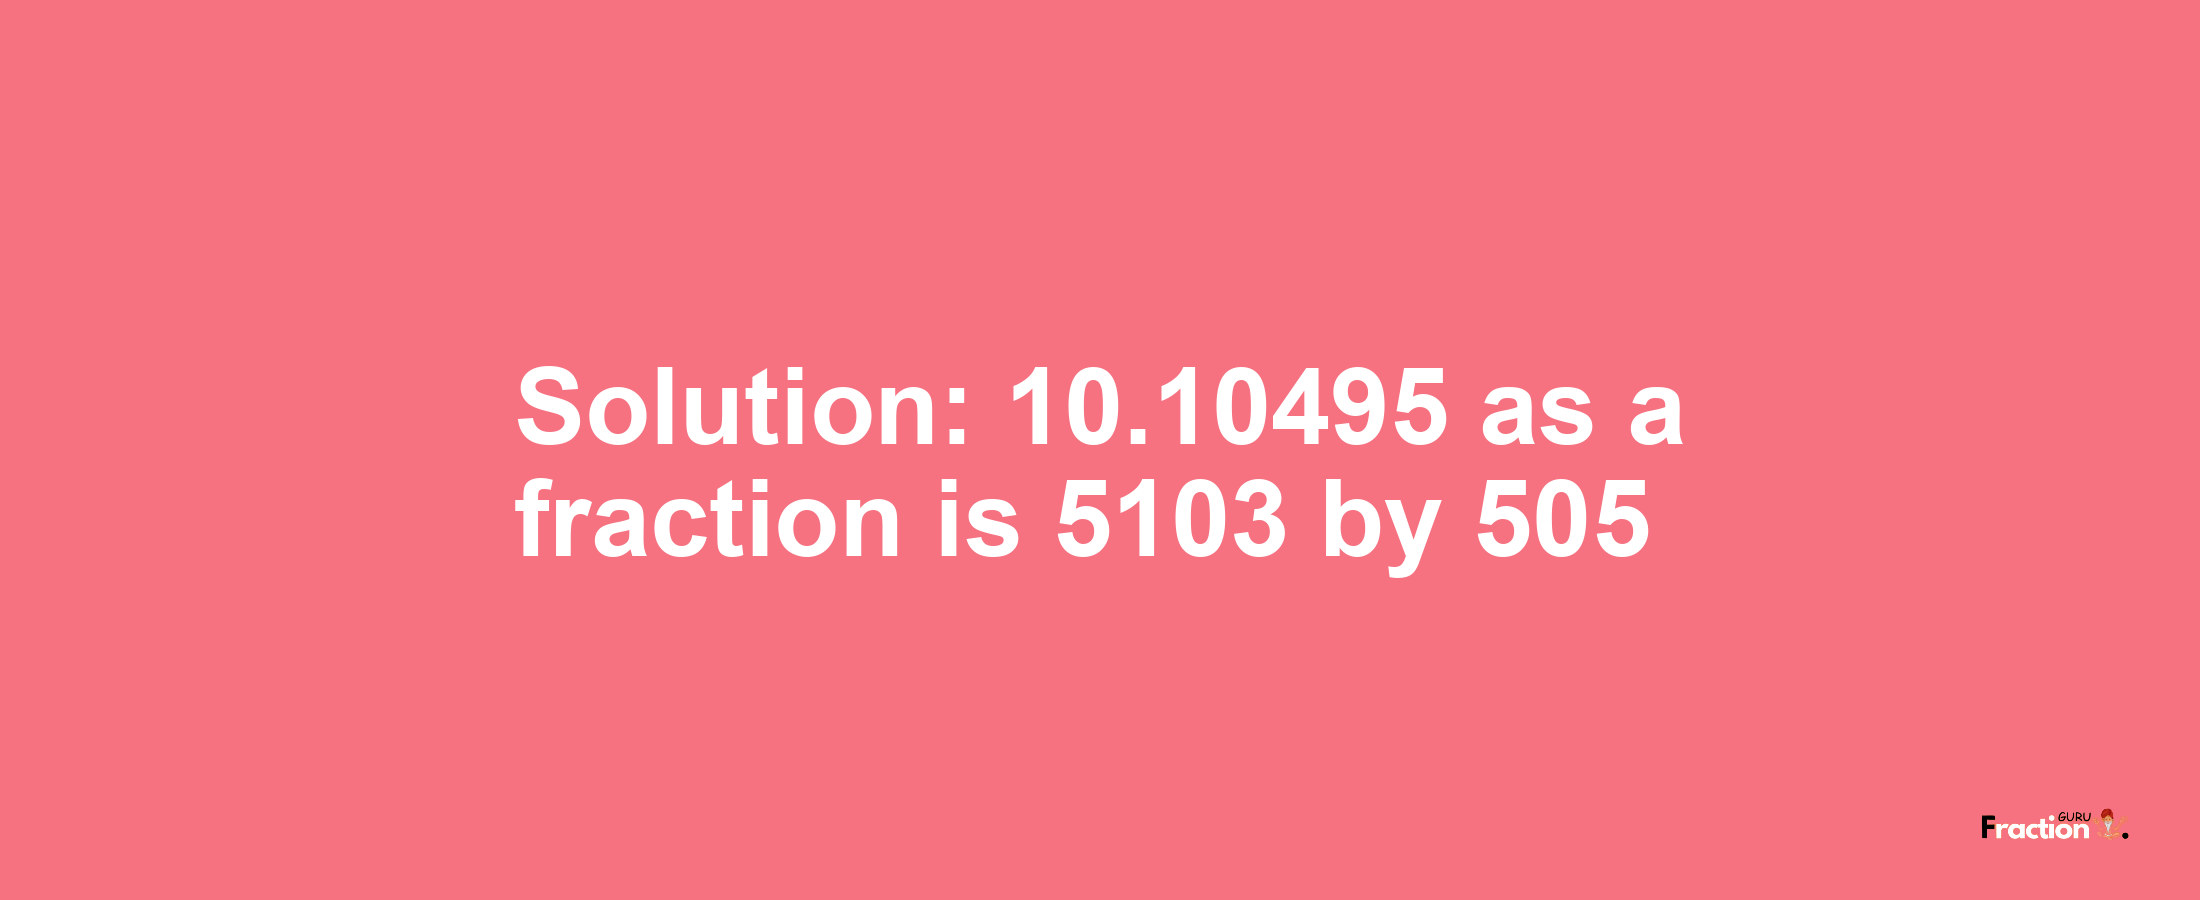 Solution:10.10495 as a fraction is 5103/505